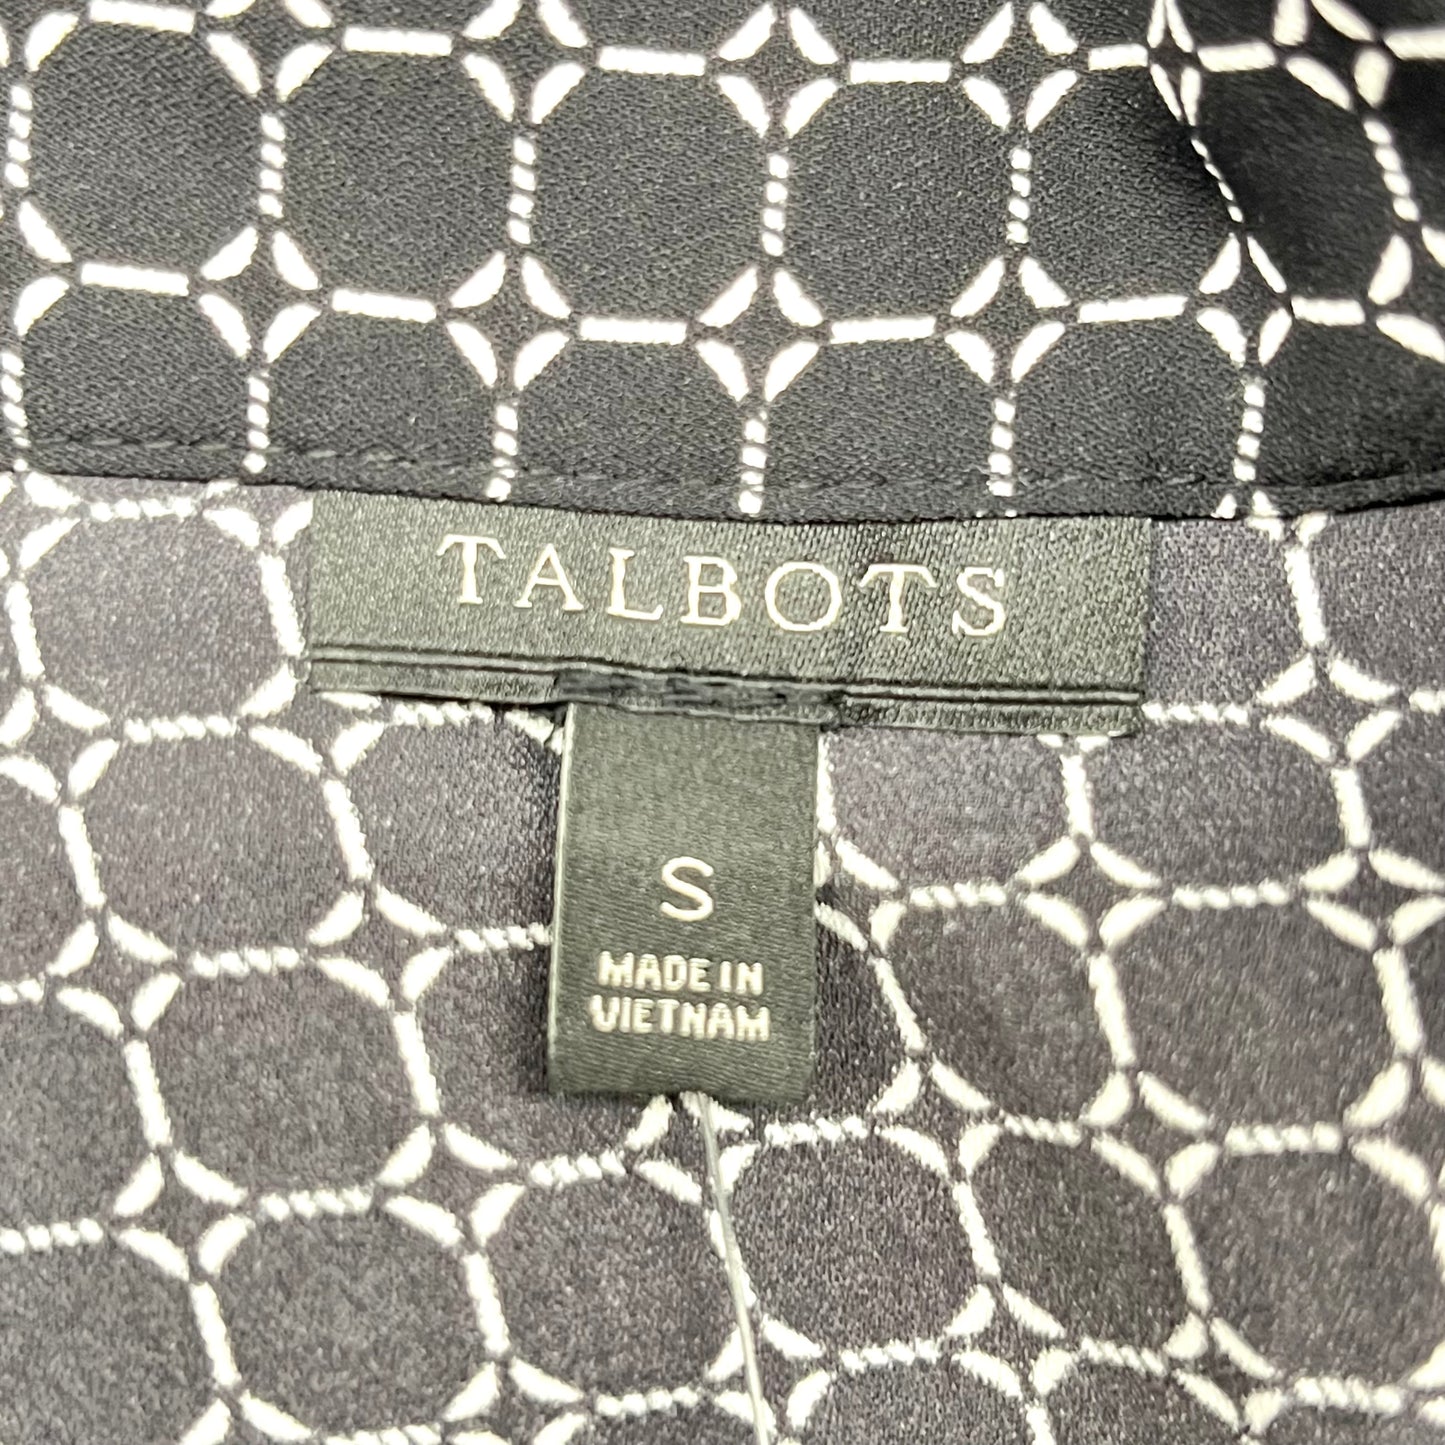 Top Sleeveless By Talbots  Size: S